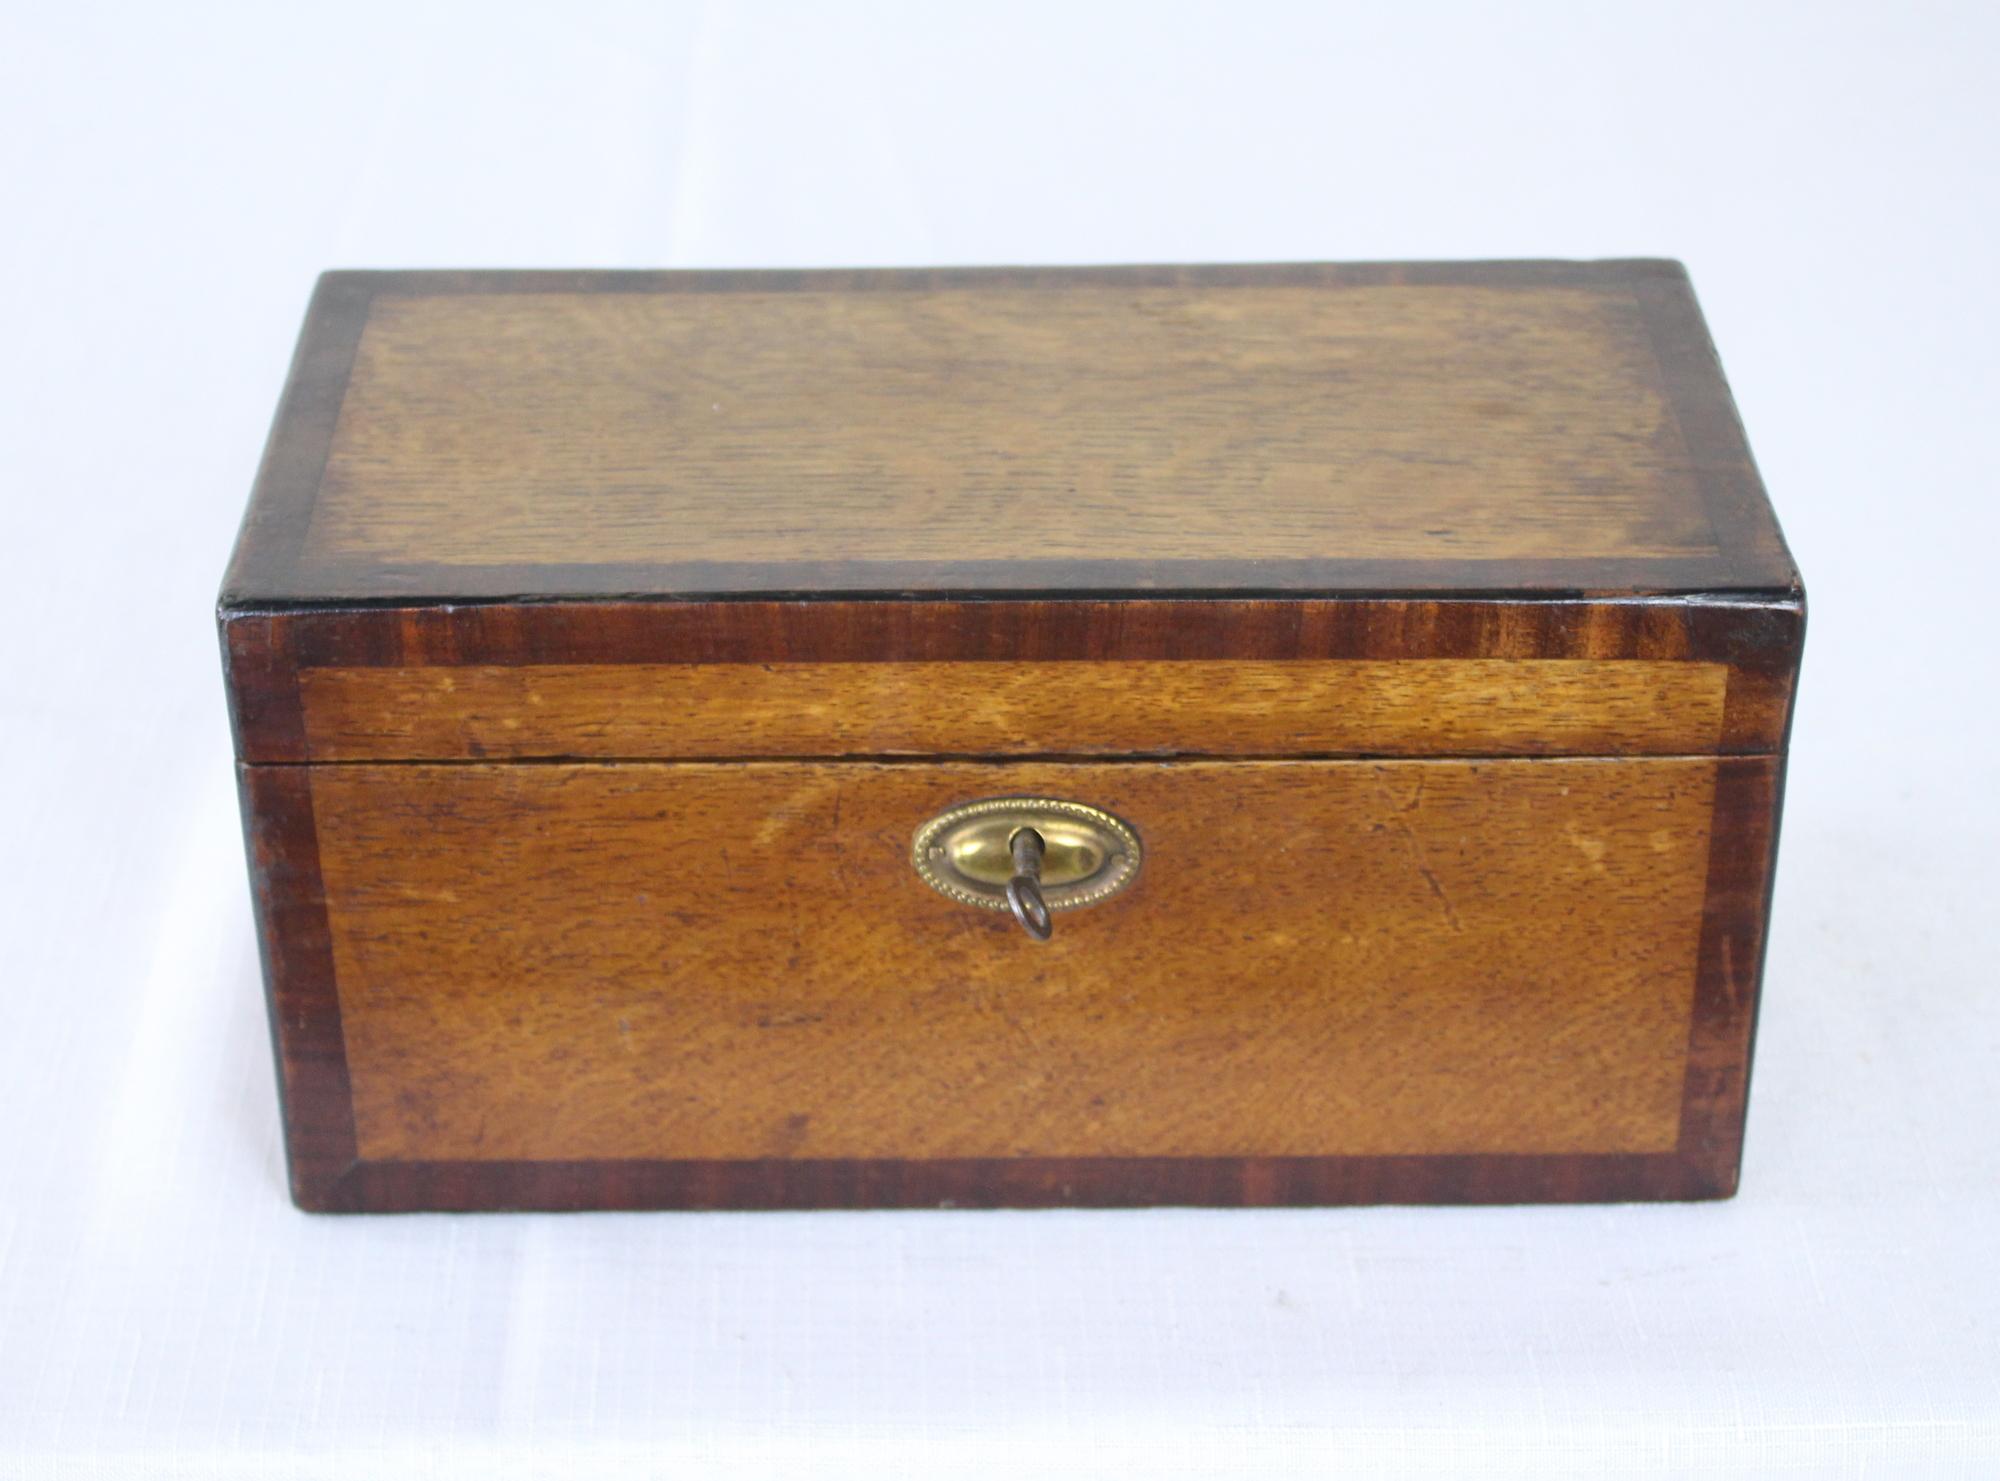 A beautiful Georgian tea caddy with original lock and key. Two compartments inside with traces of the original paper. Good oak grain and nice patina all over.